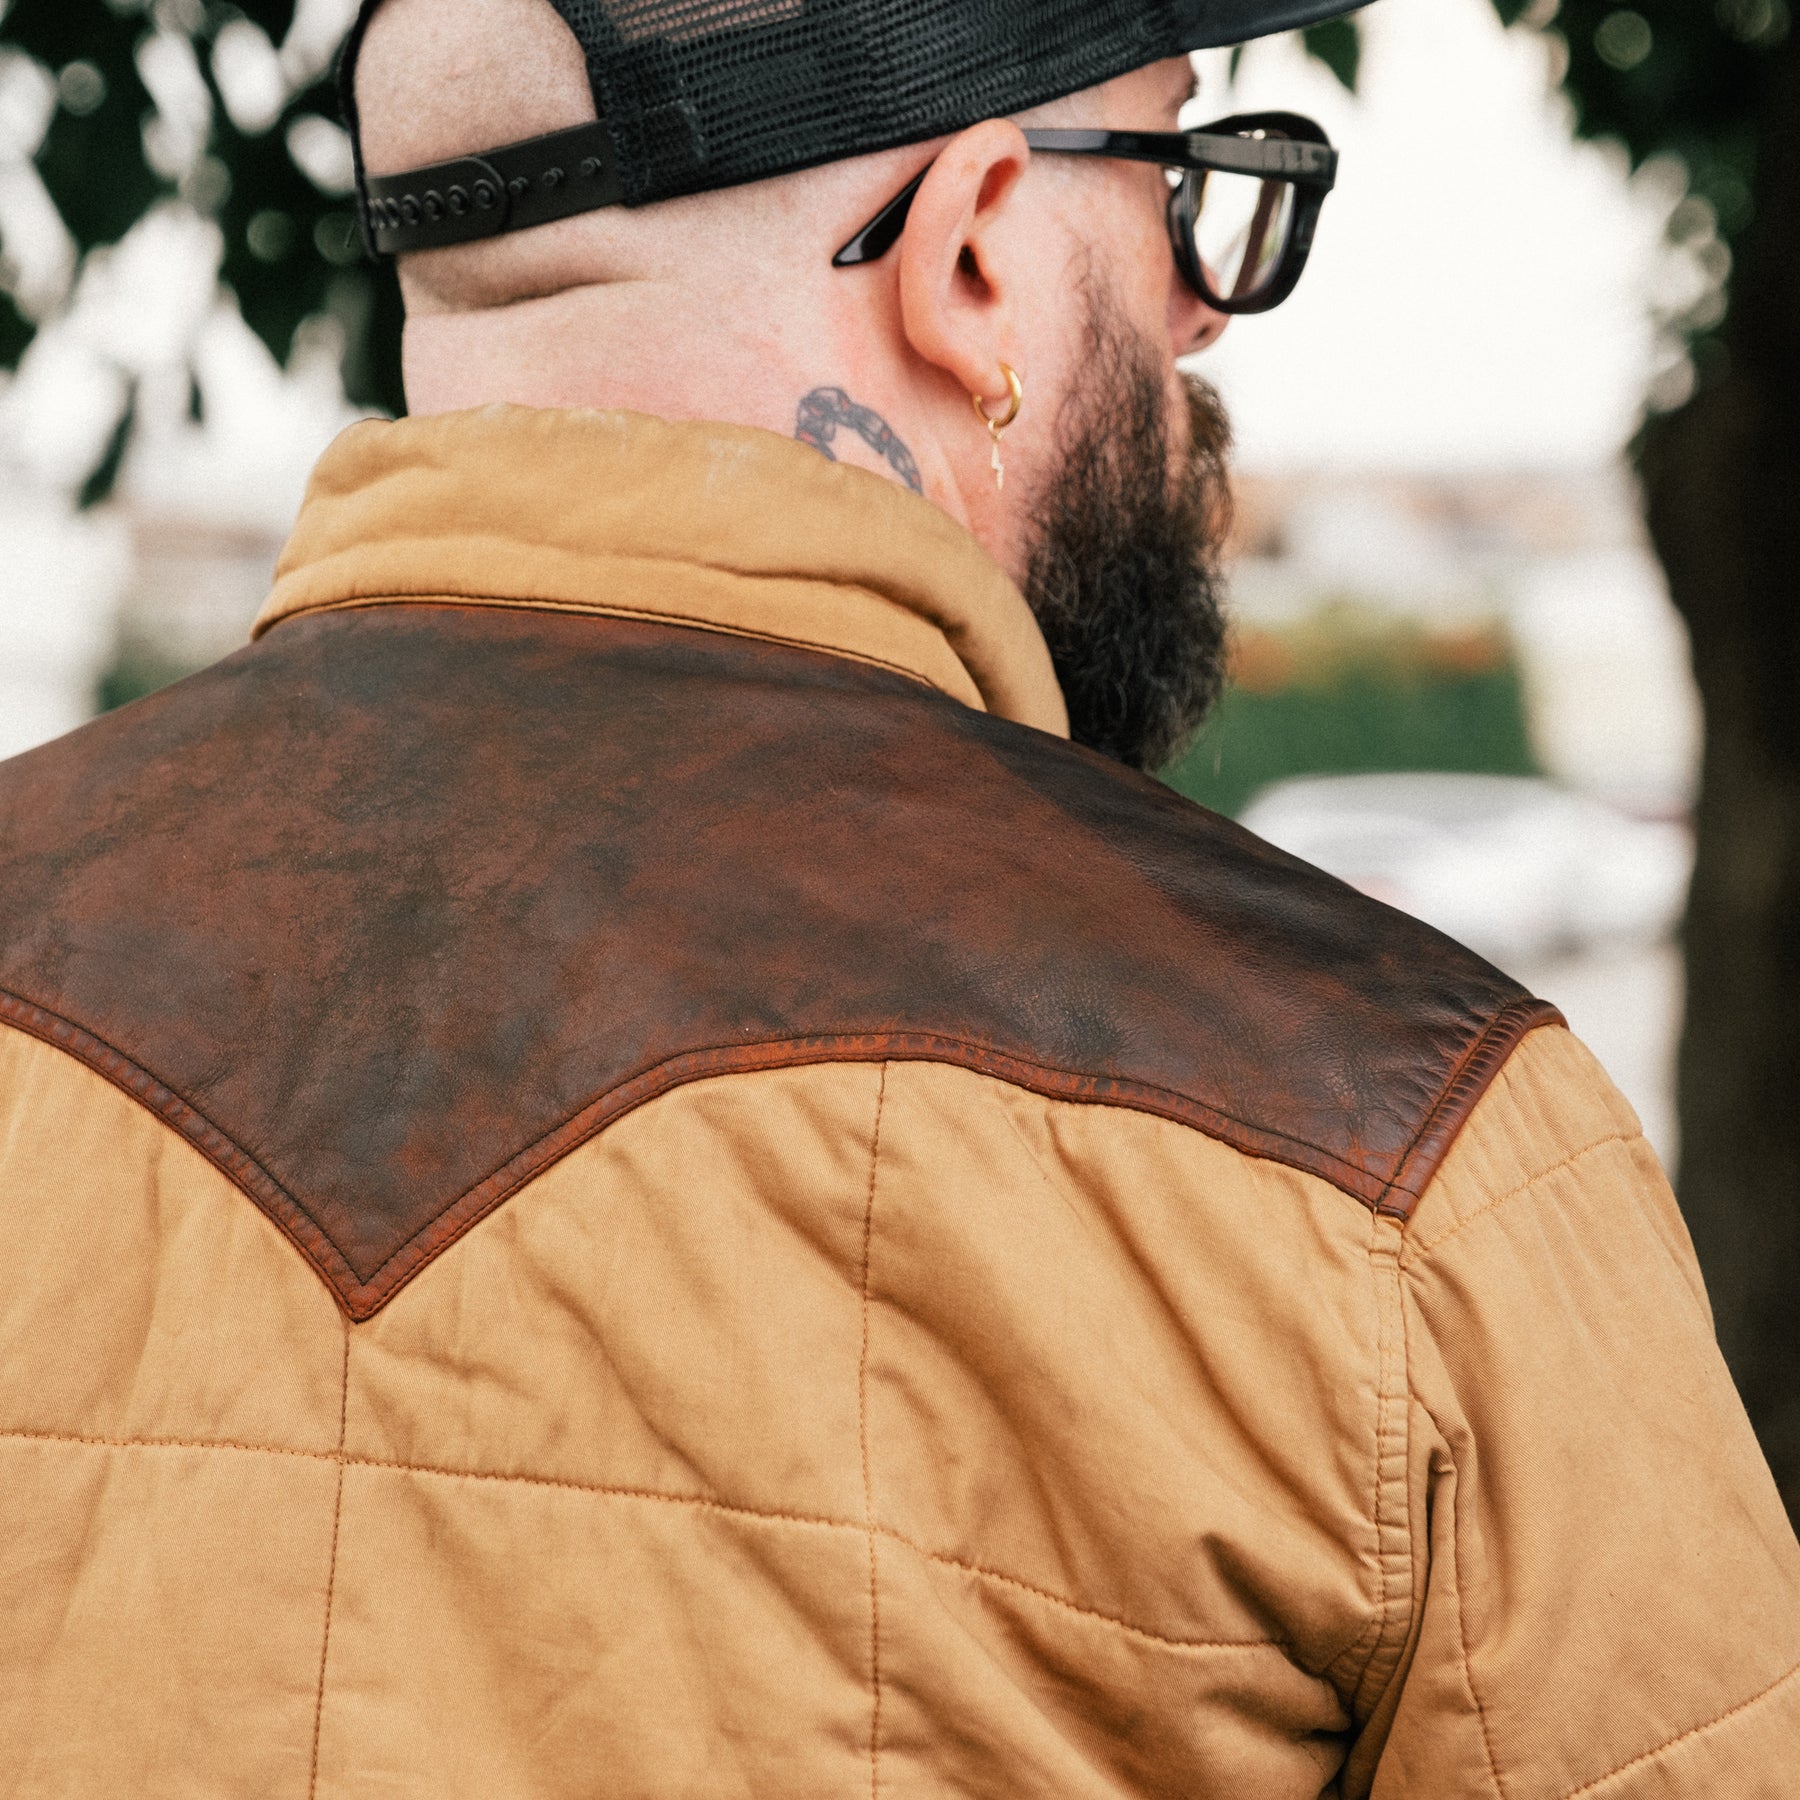 RRL Leather-Yoke Quilted Oilcloth Jacket Tan